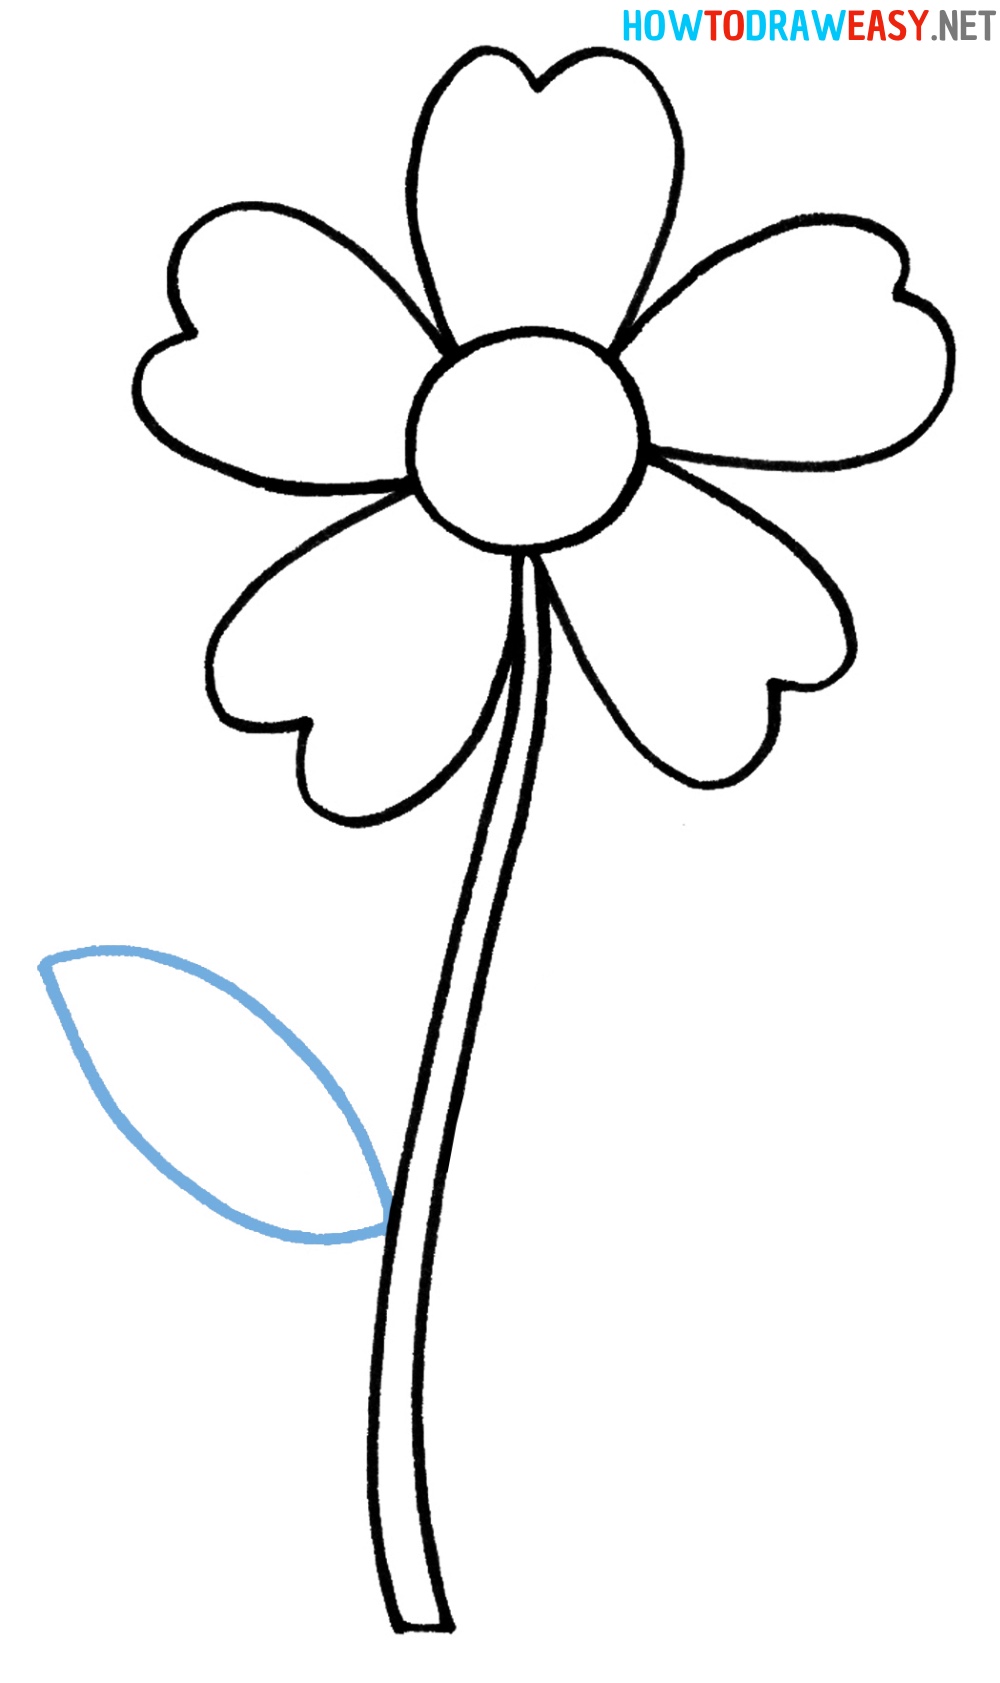 How to Draw a Flower Simple